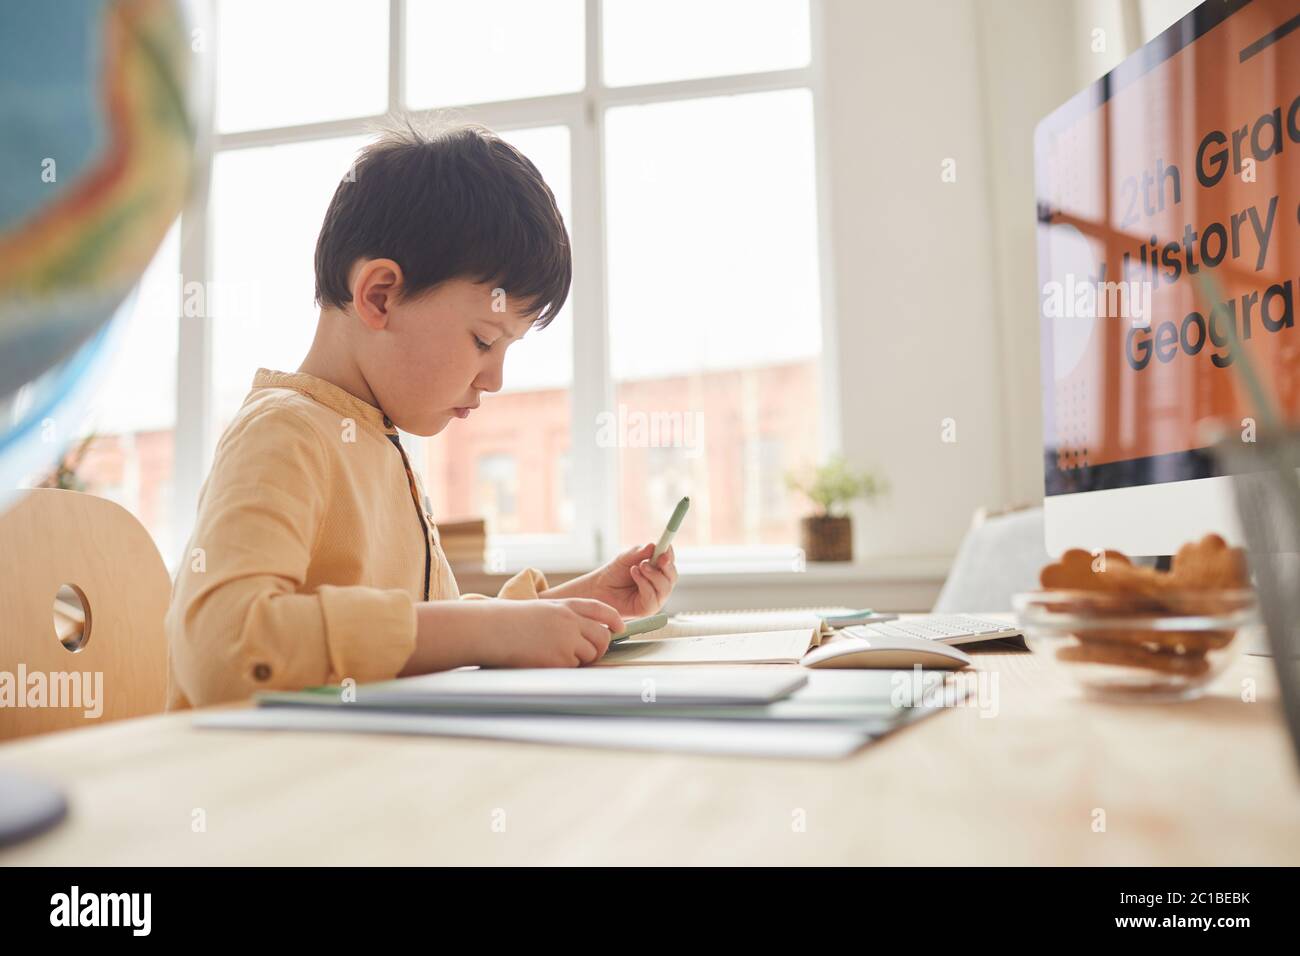 Sde view portrait of cute little boy doing homework while sitting at desk by computer with online school website, copy space Stock Photo